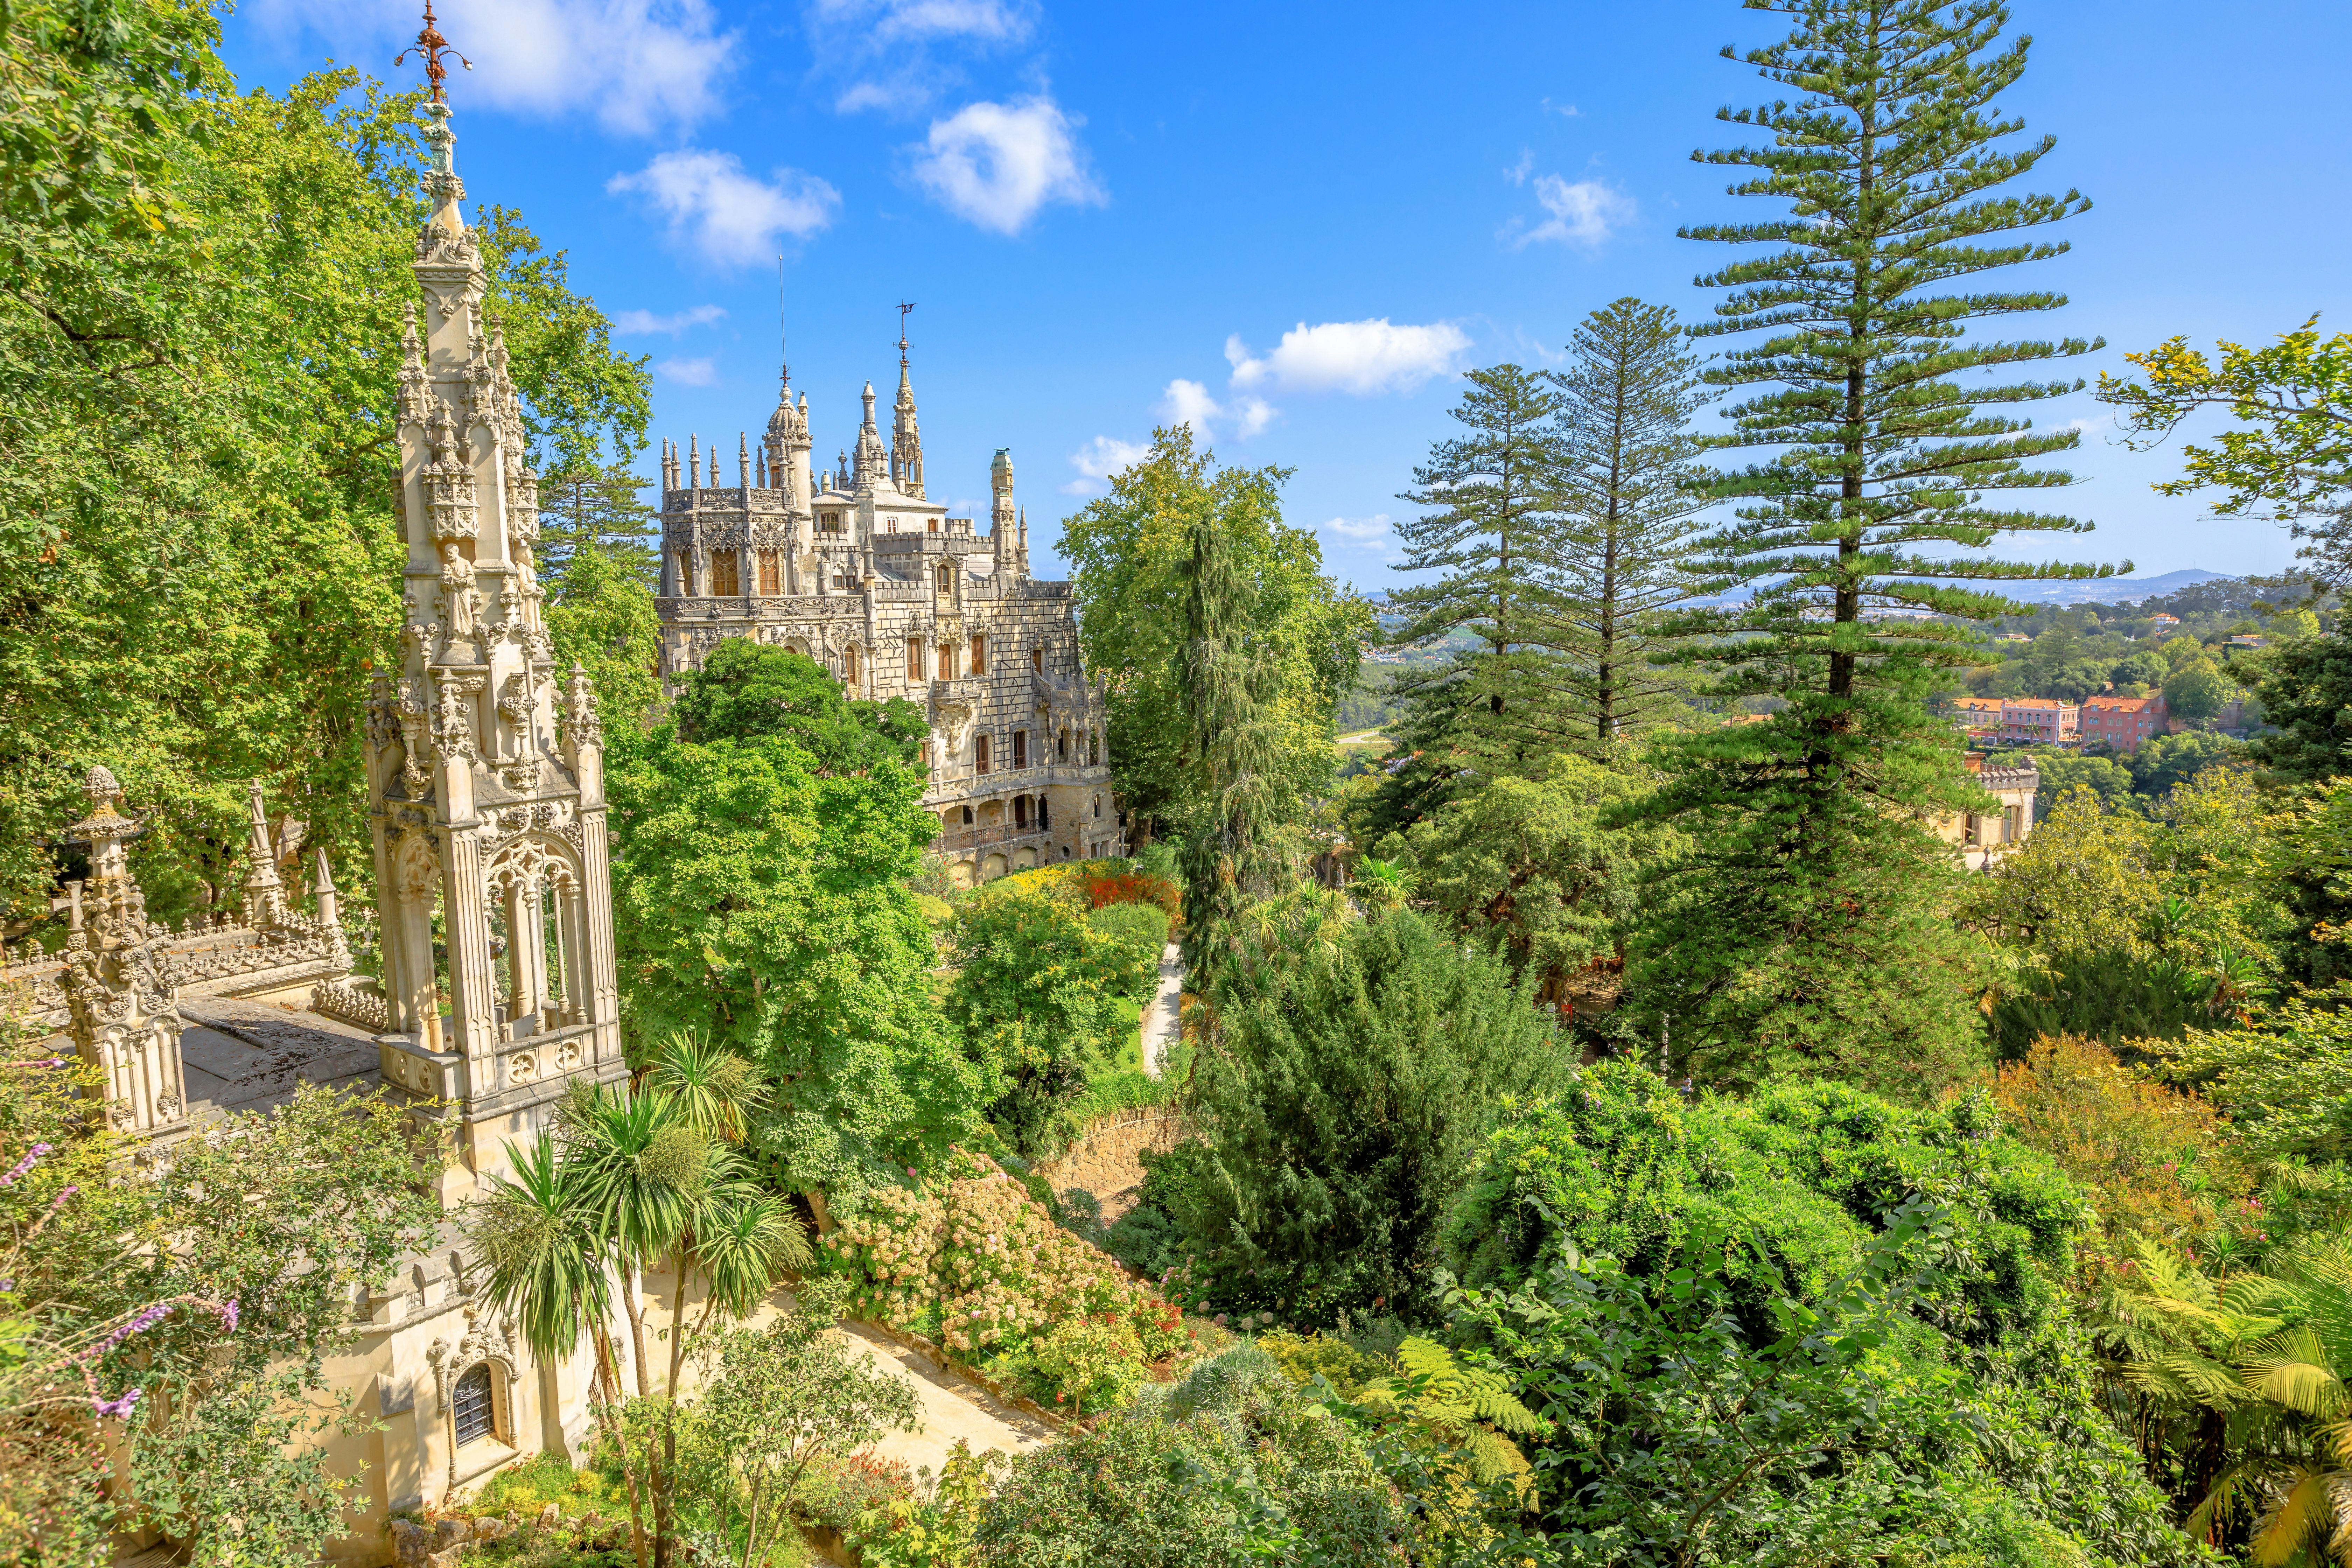 The spires of Quinta da Regaleira are visible through the trees from an elevated viewpoint.